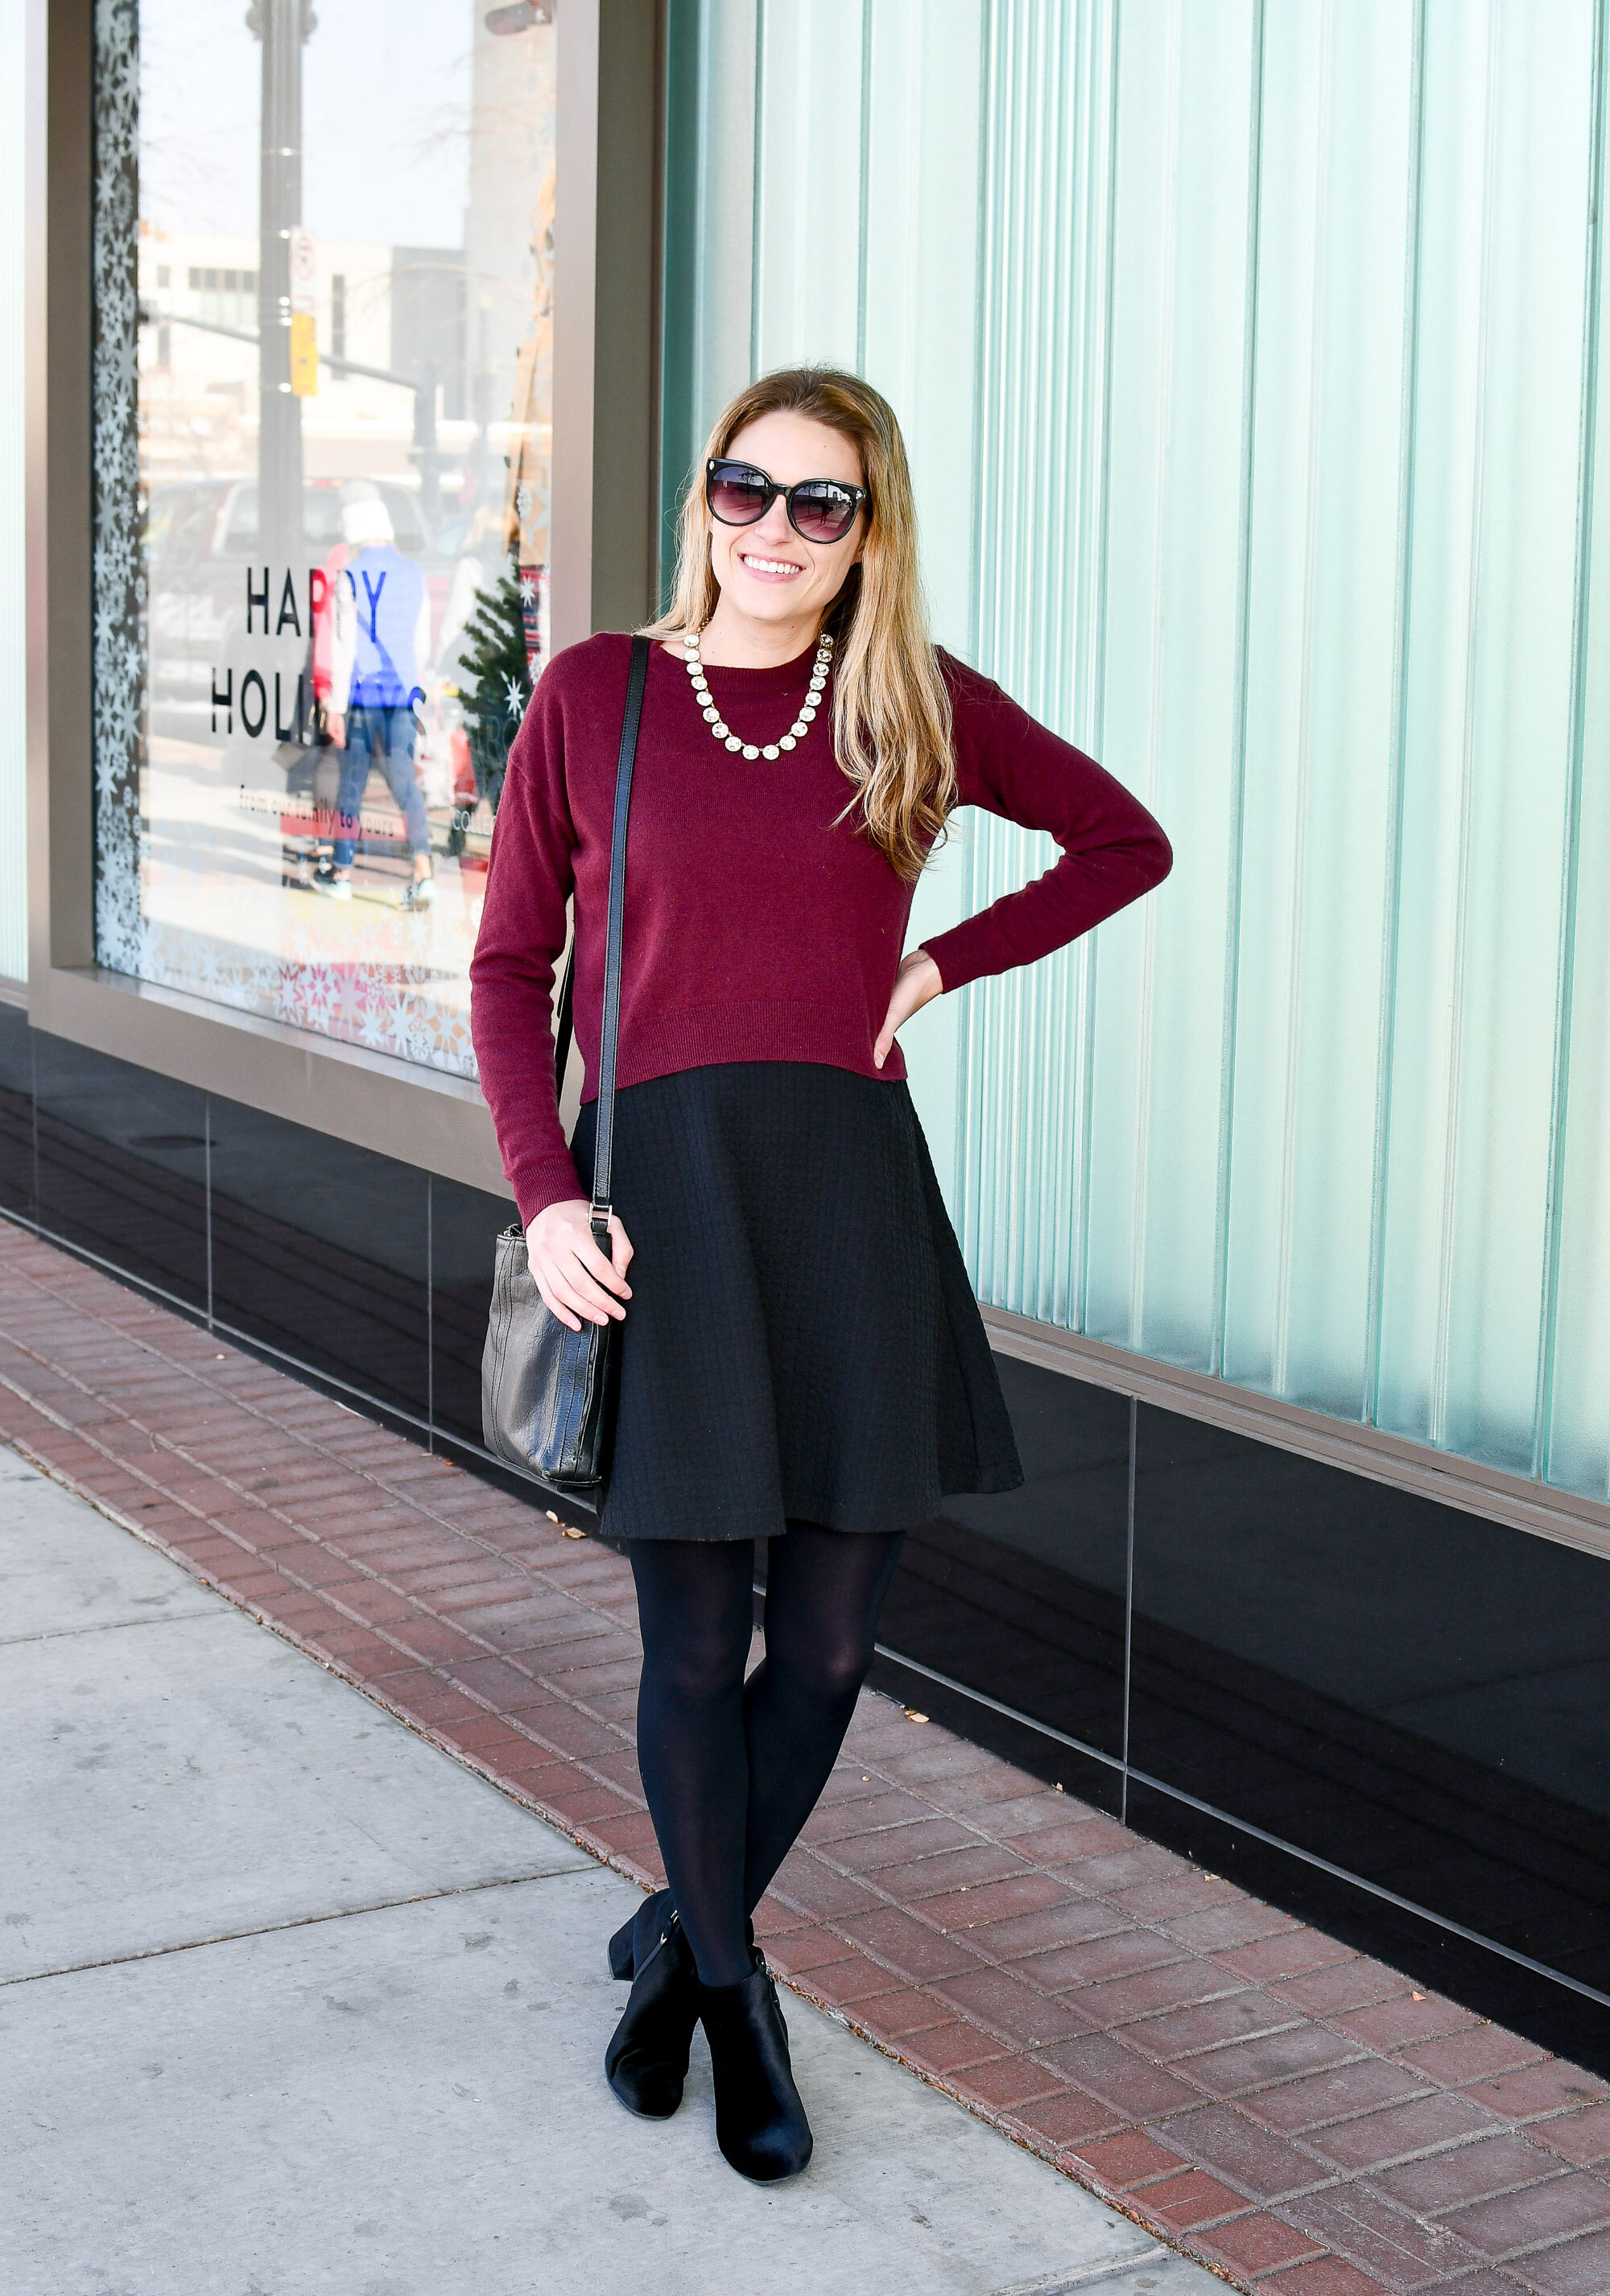 Holiday outfit idea: burgundy cropped sweater over black dress, black velvet ankle boots, crystal statement necklace — Cotton Cashmere Cat Hair